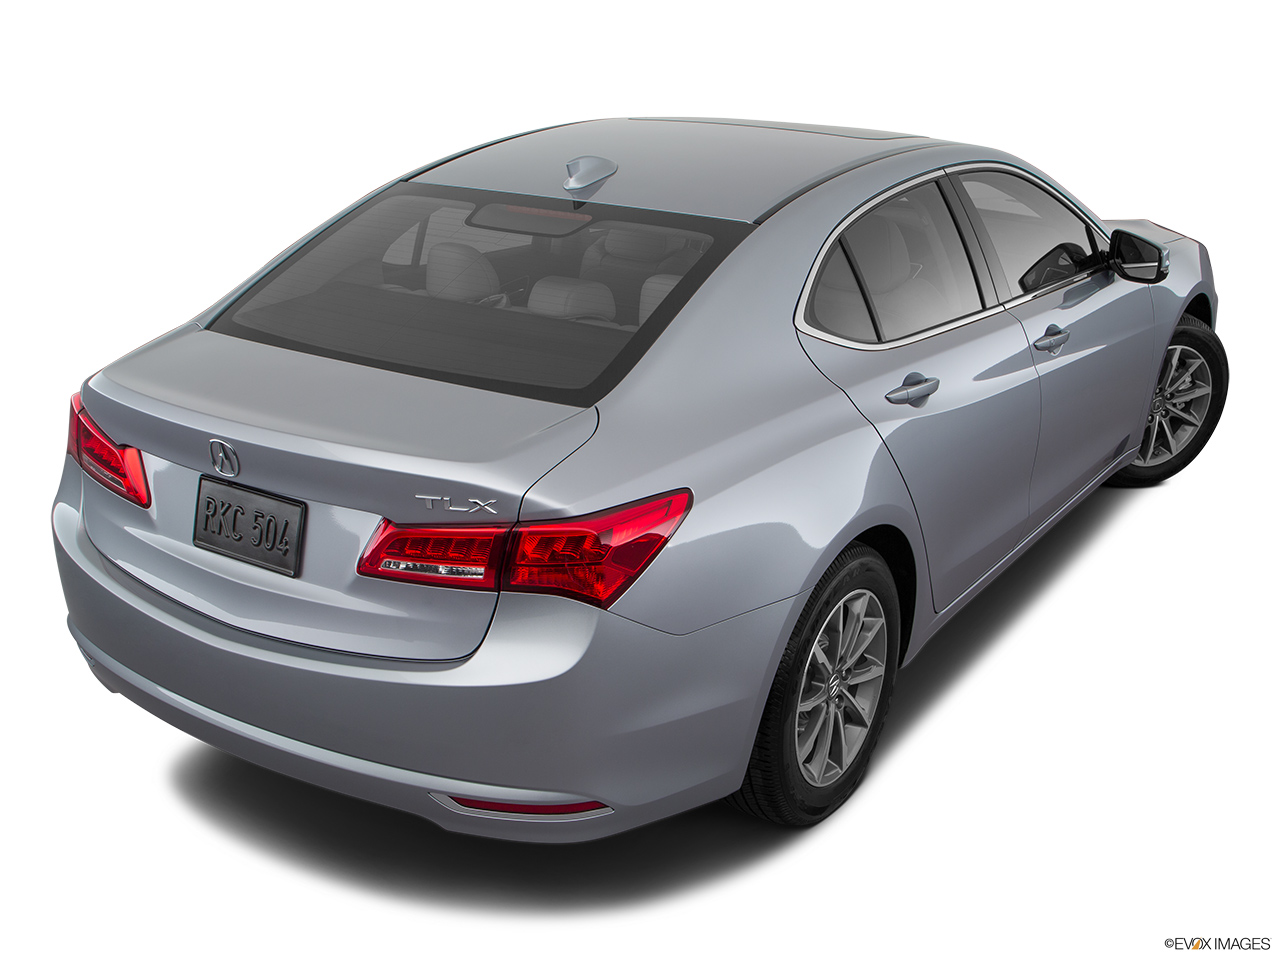 2020 Acura TLX 2.4 8-DCT P-AWS Rear 3/4 angle view. 